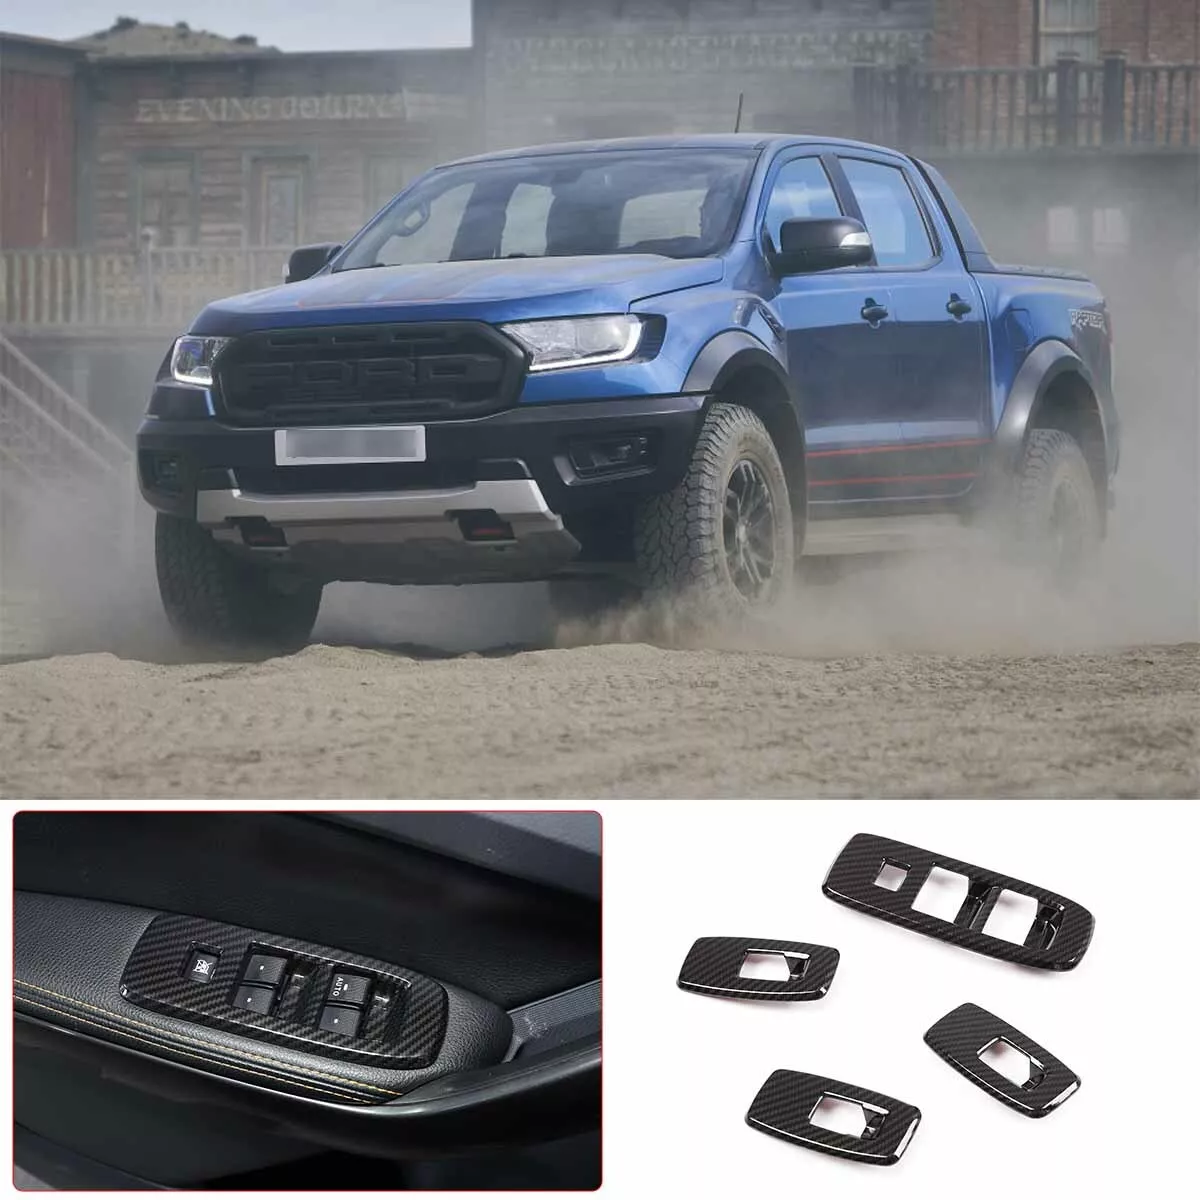 Car Accessories OEM Kits for Ford Ranger - China Full Car Kits, ABS